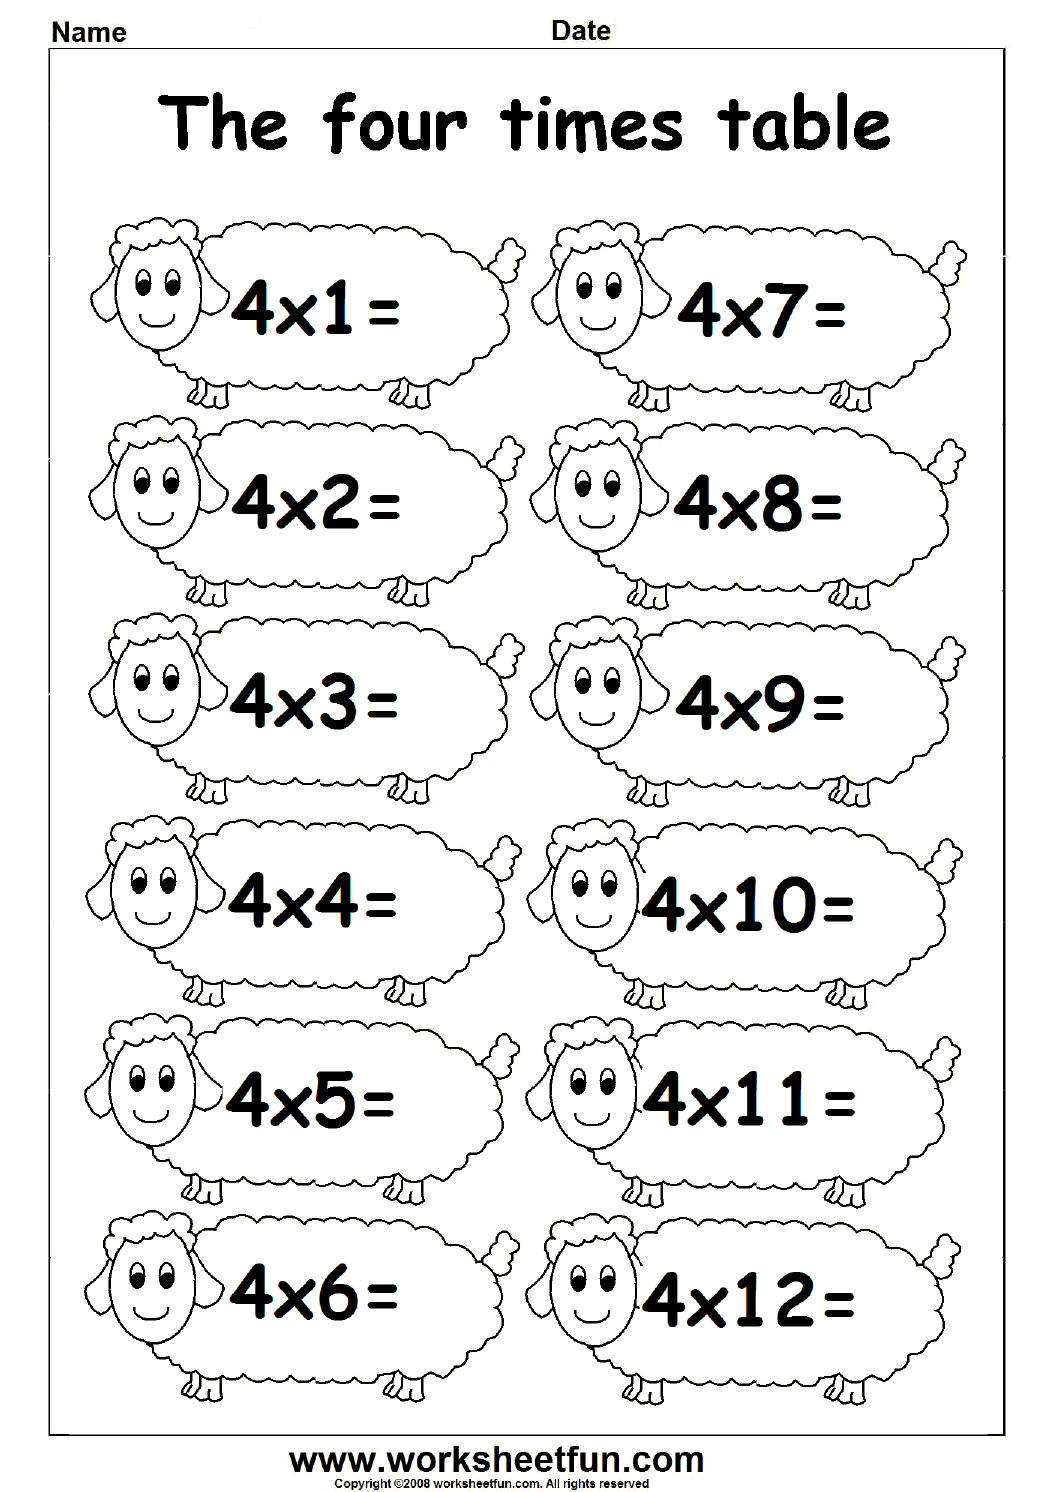 Multiplication Times Tables Worksheets – 2, 3 &amp; 4 Times pertaining to Multiplication Worksheets 3 And 4 Times Tables